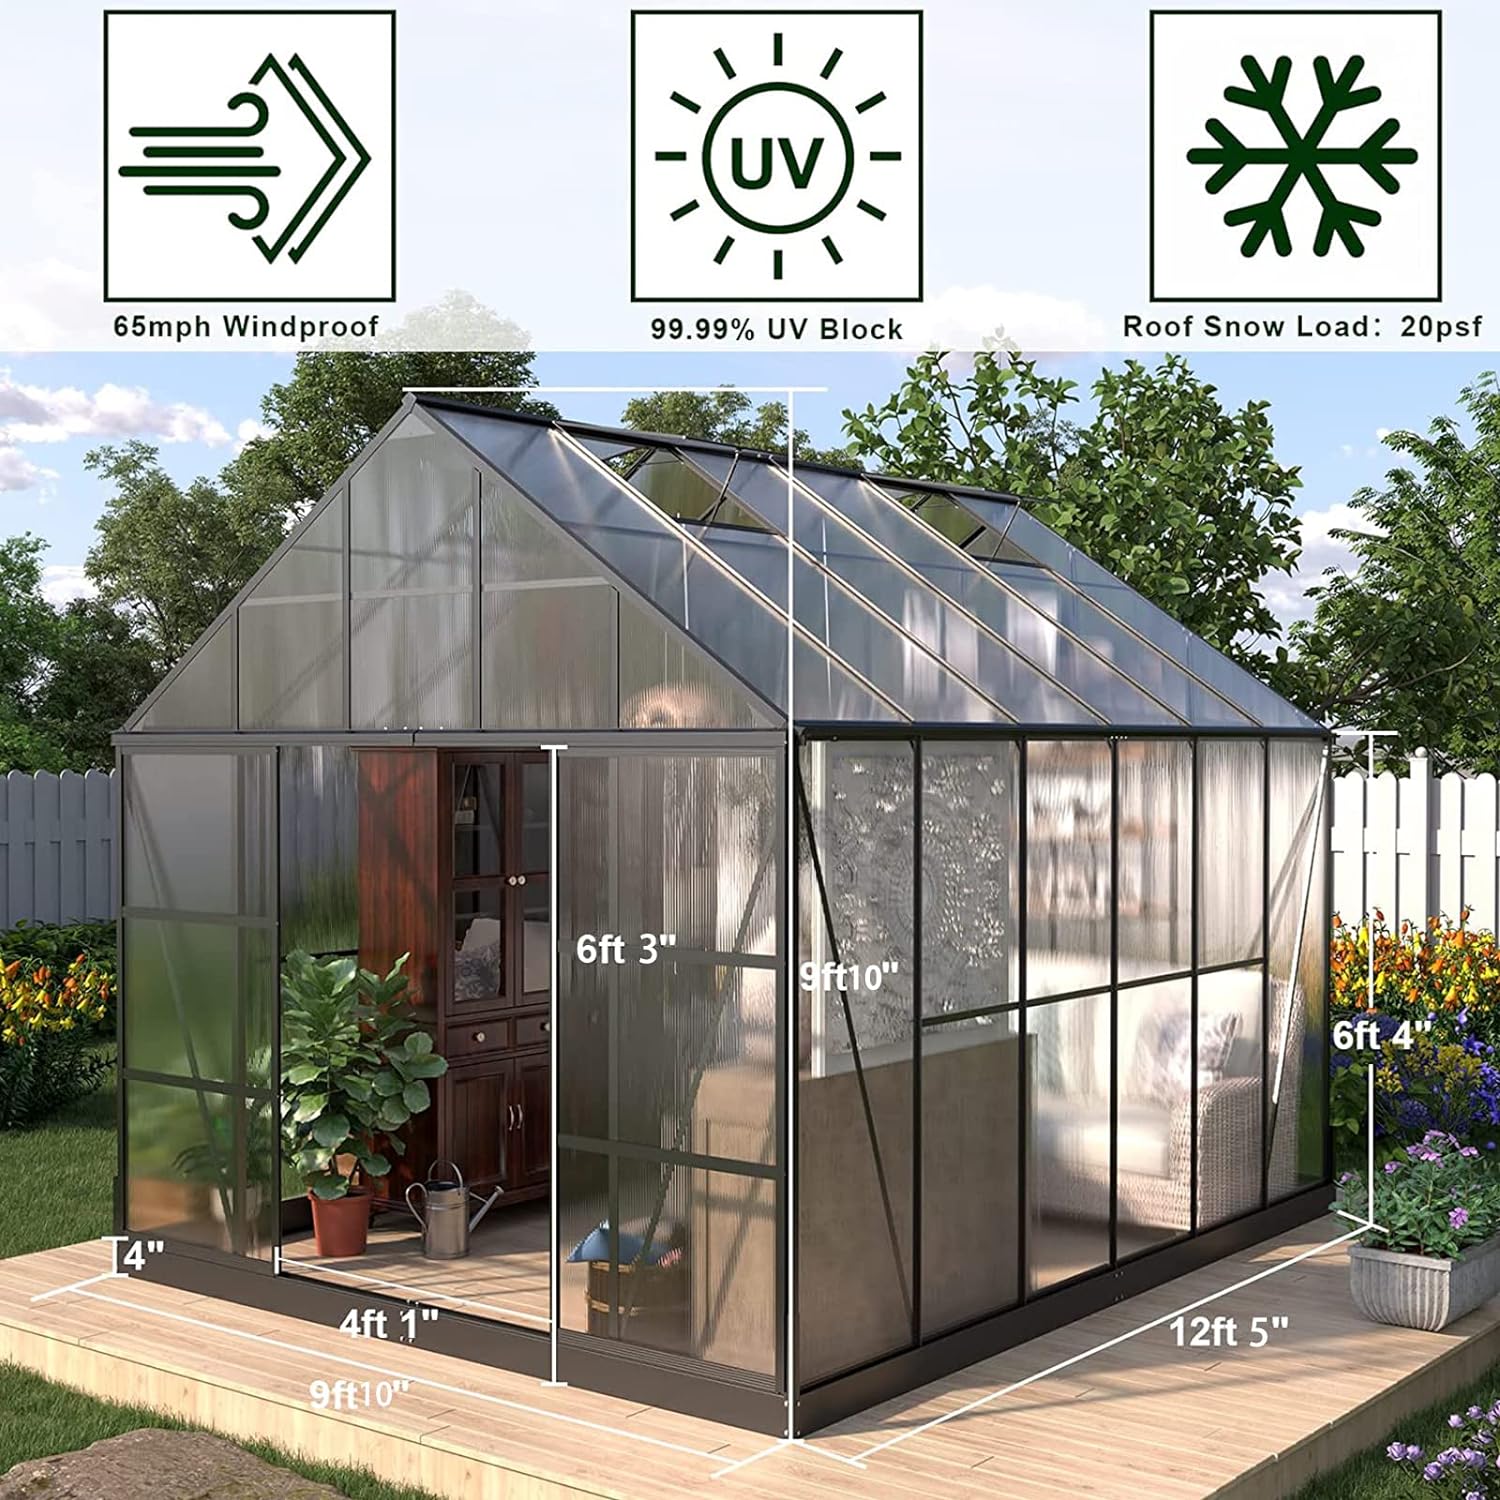 AMERLIFE 12x10x10FT Polycarbonate Greenhouse 2 Sliding Doors 4 Vents Walk-in Premium Professional Greenhouse Storage Shed Sunroom Aluminum Large Hot House for Outdoor Garden Backyard Matte Black - image 2 of 7